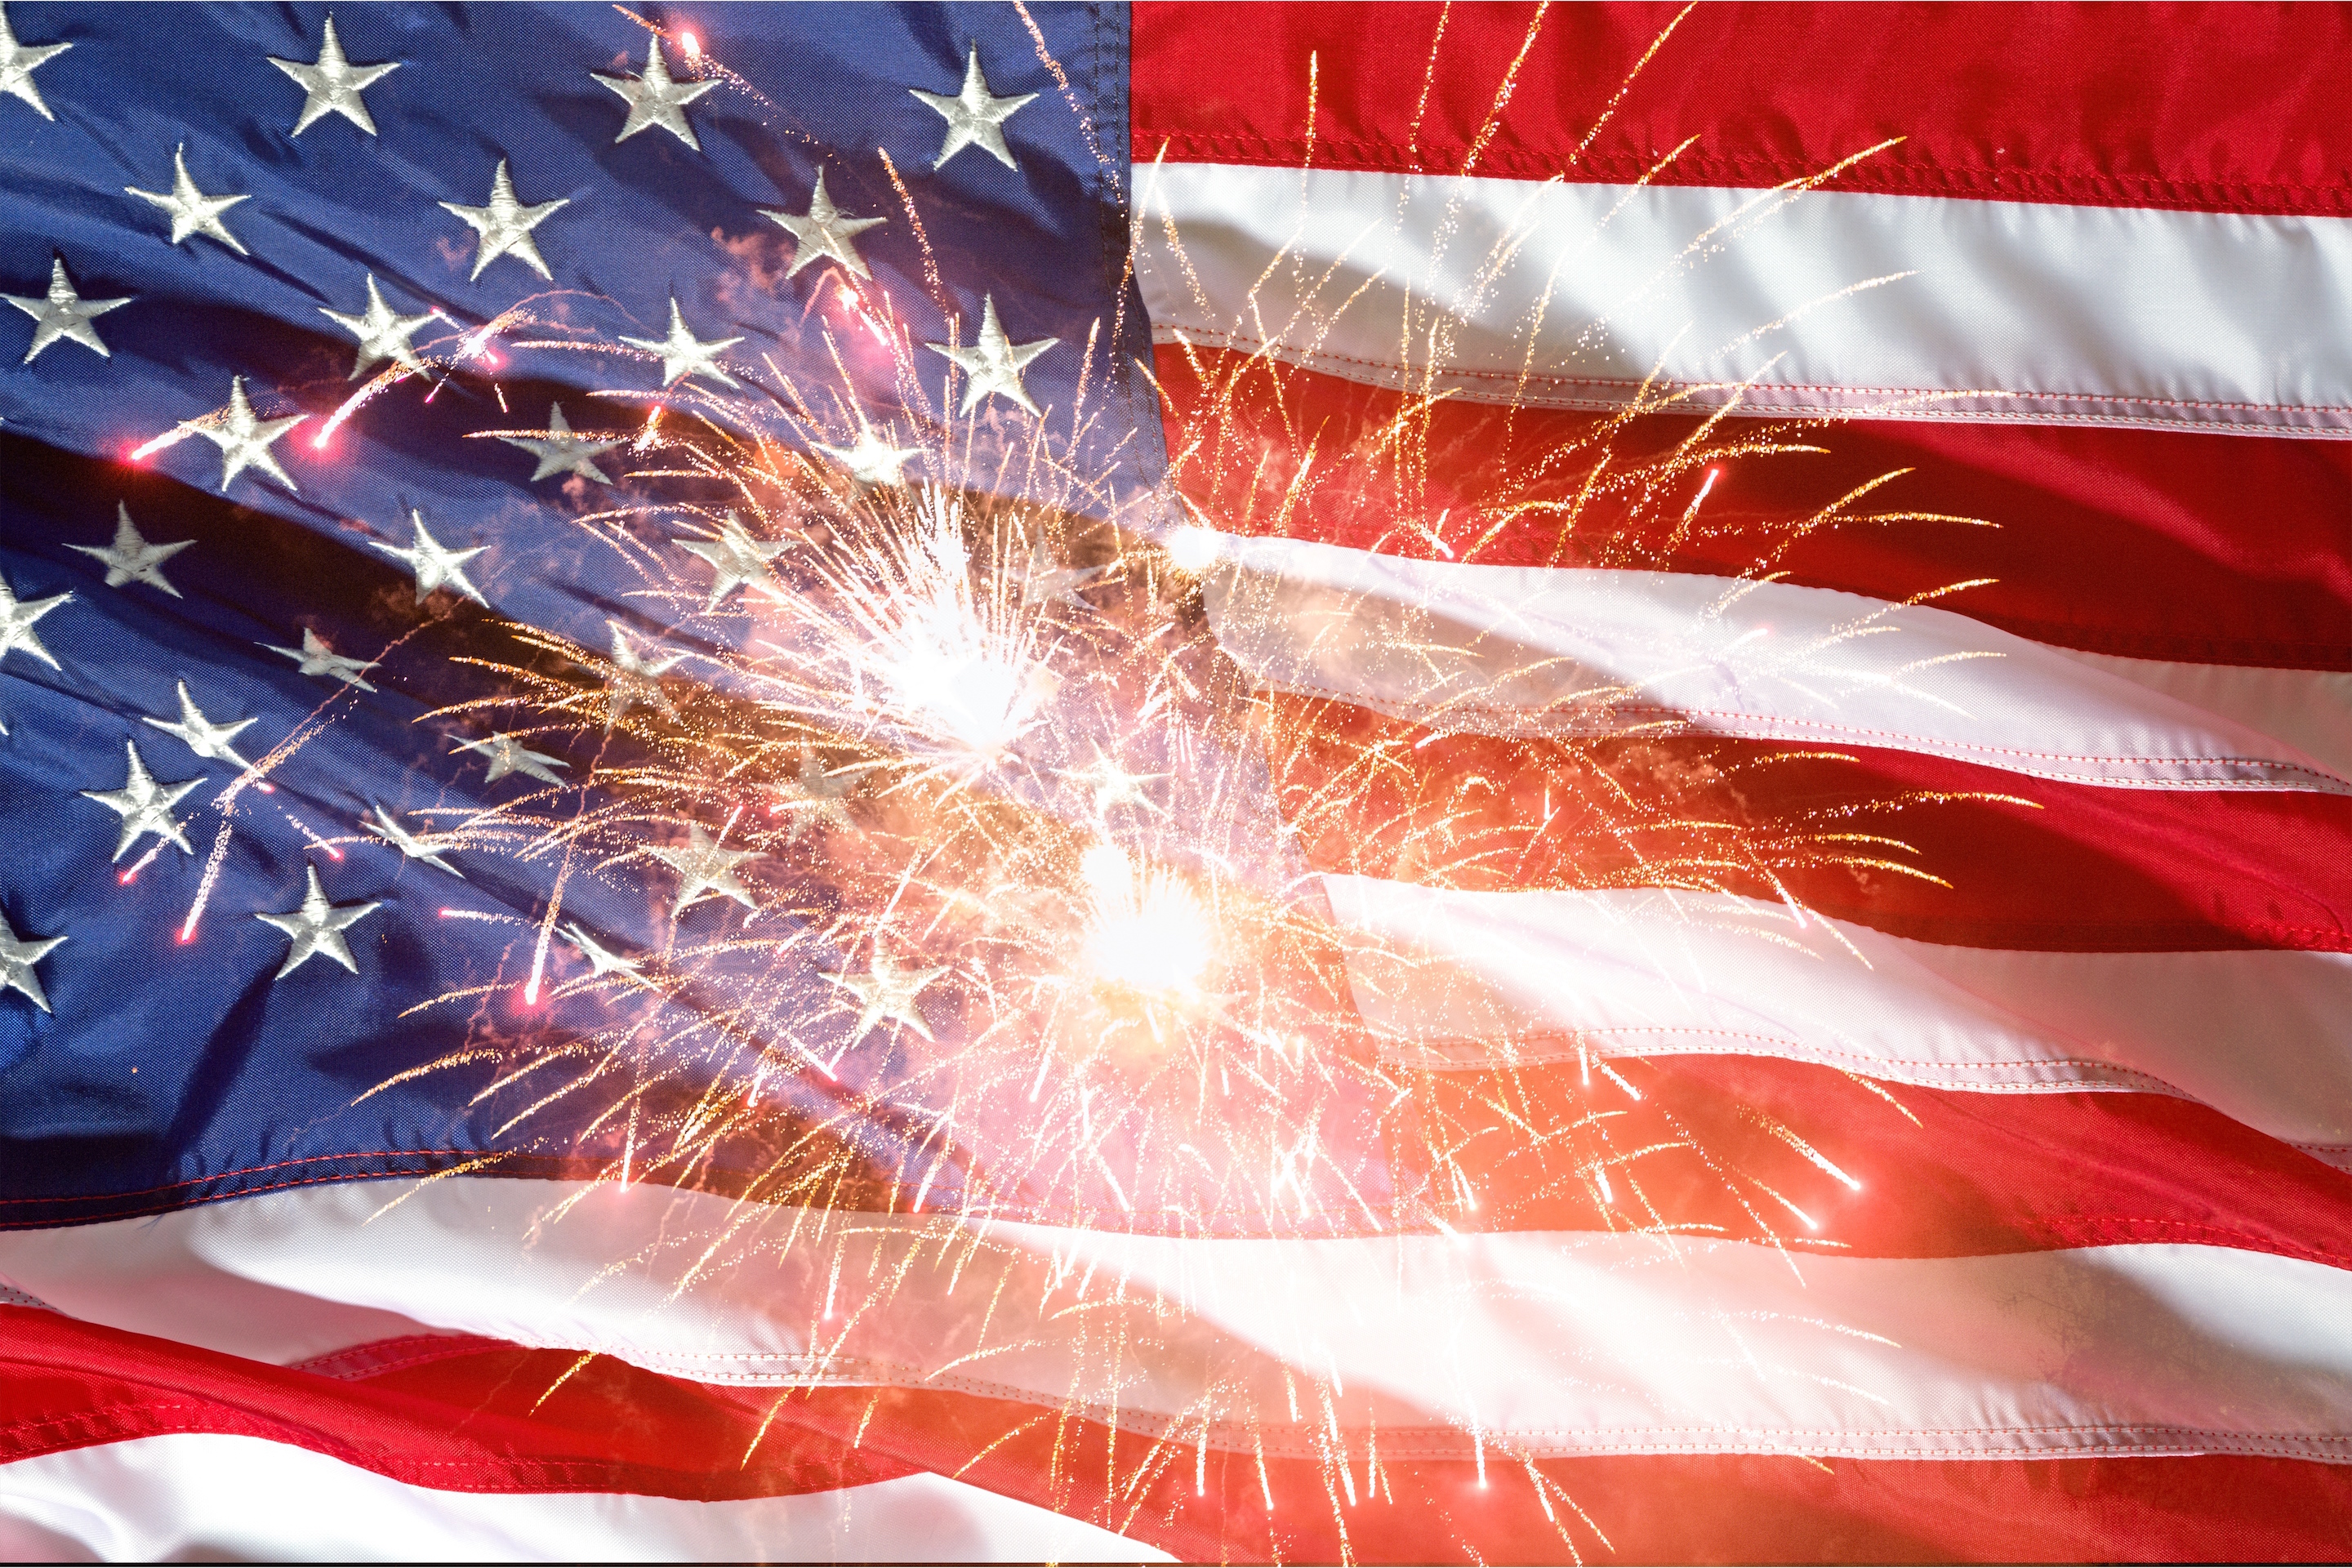 20 Inspiring Quotes for the Fourth of July